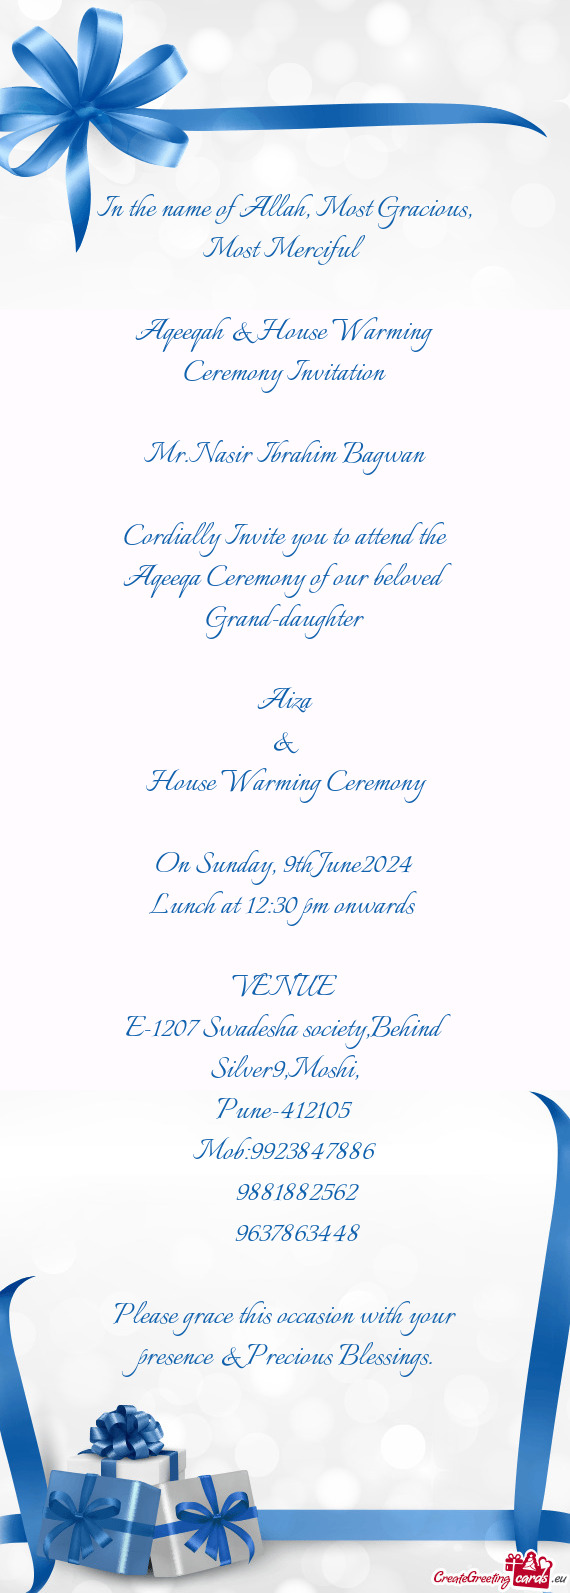 Cordially Invite you to attend the Aqeeqa Ceremony of our beloved Grand-daughter